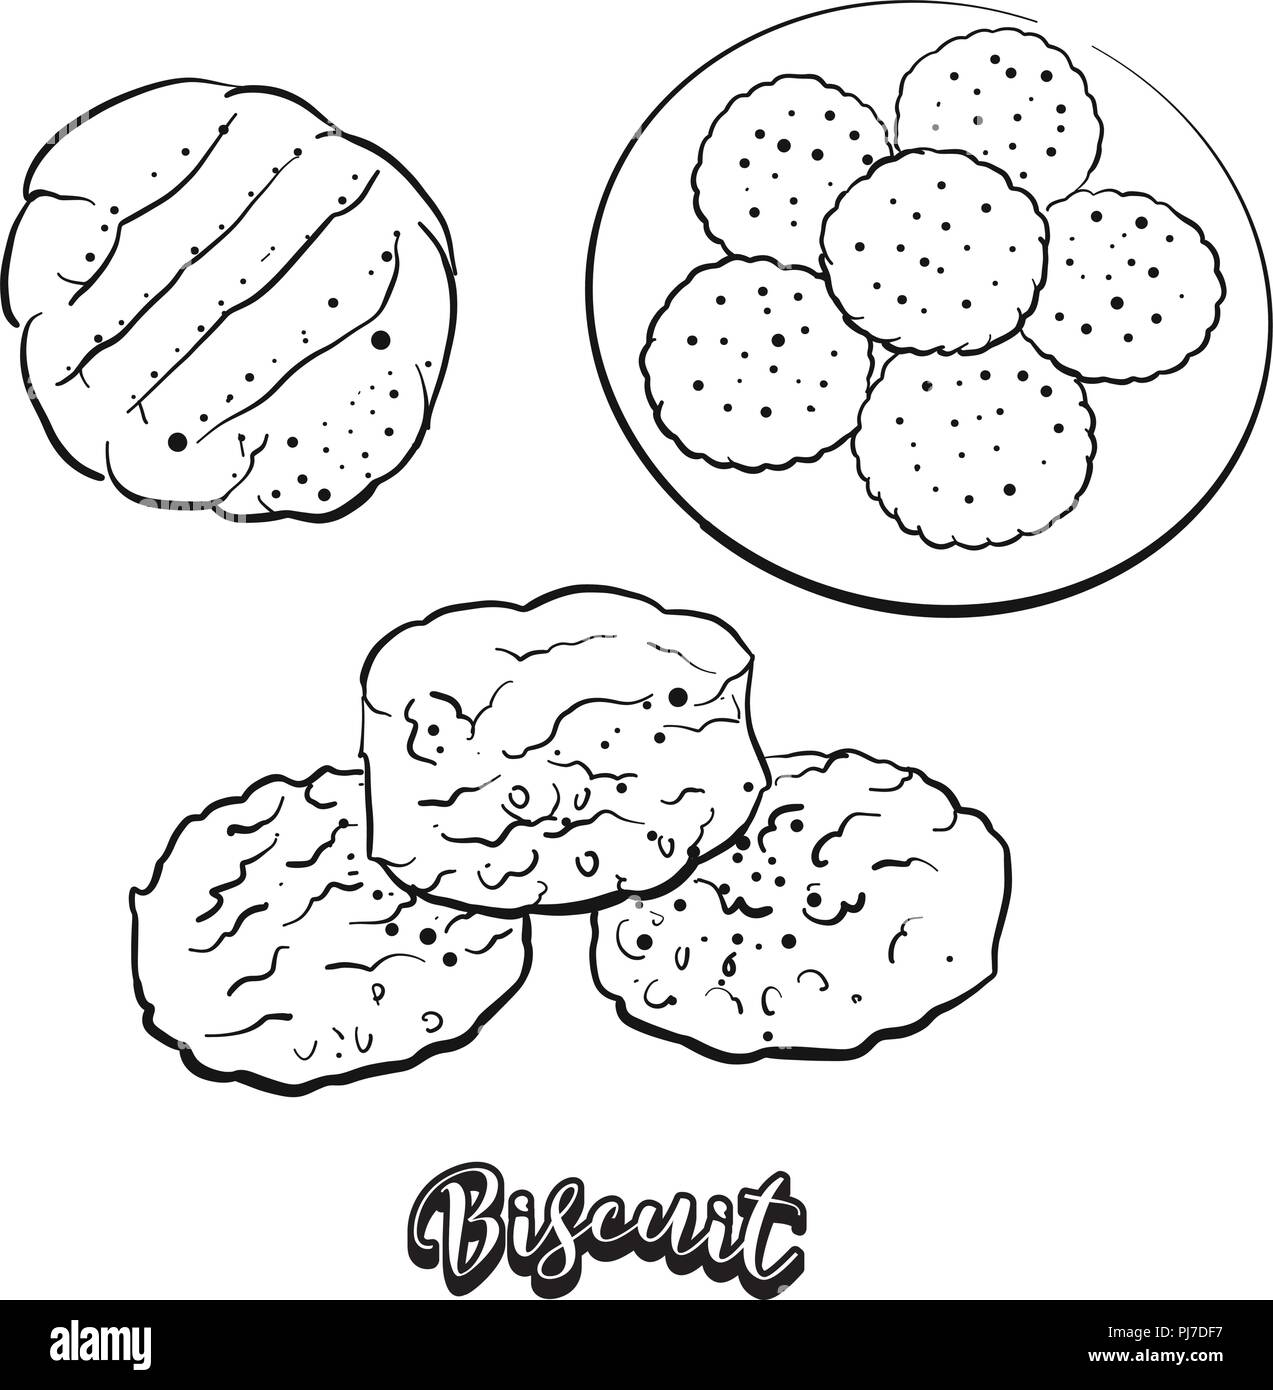 Hand drawn sketch of Biscuit bread. Vector drawing of Yeast bread or unleavened food, usually known in North America and Europe. Bread illustration se Stock Vector